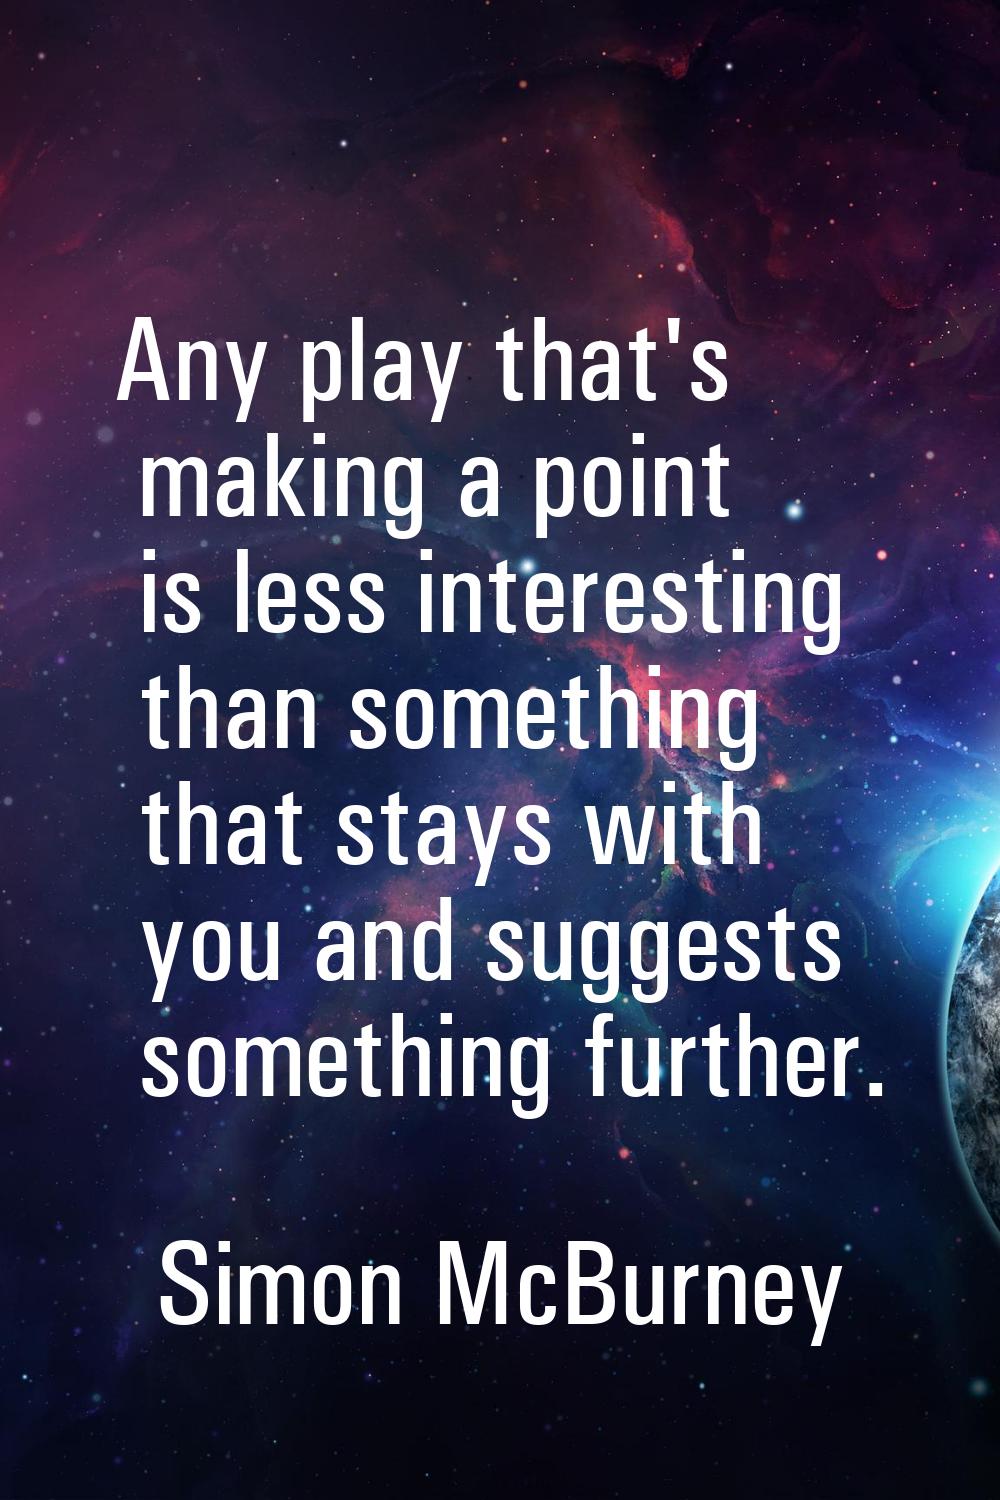 Any play that's making a point is less interesting than something that stays with you and suggests 